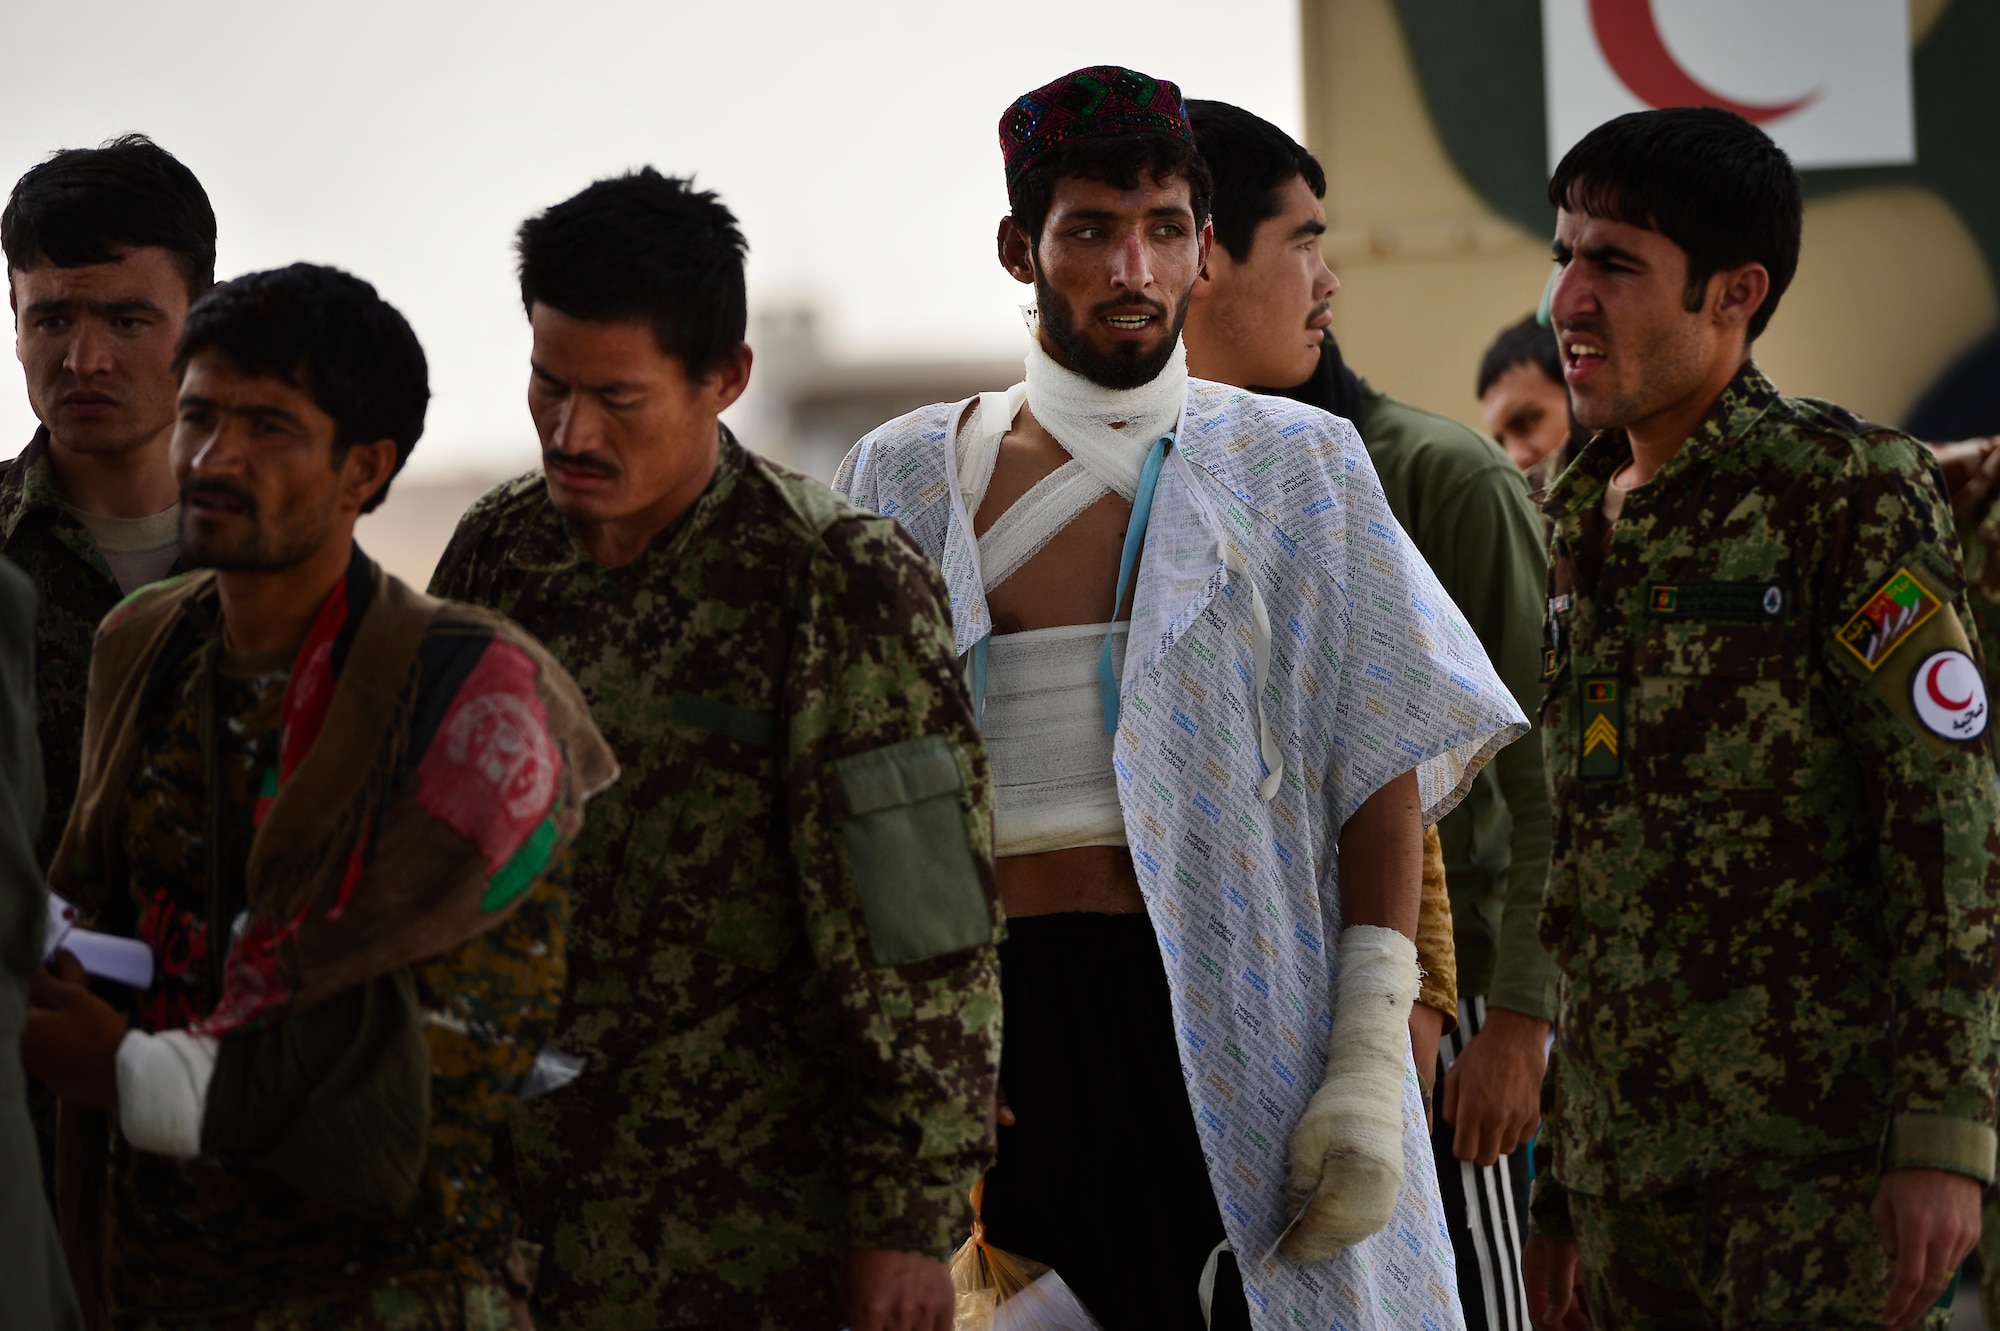 Afghan National Army soldiers prepare to board a C-130H1 Hercules during a casualty evacuation mission, Camp Bastion, Afghanistan, May 19, 2014. Sixteen injured ANA soldiers were transported to receive medical care to their injuries. (U.S. Air Force photo by Staff Sgt. Vernon Young Jr.)